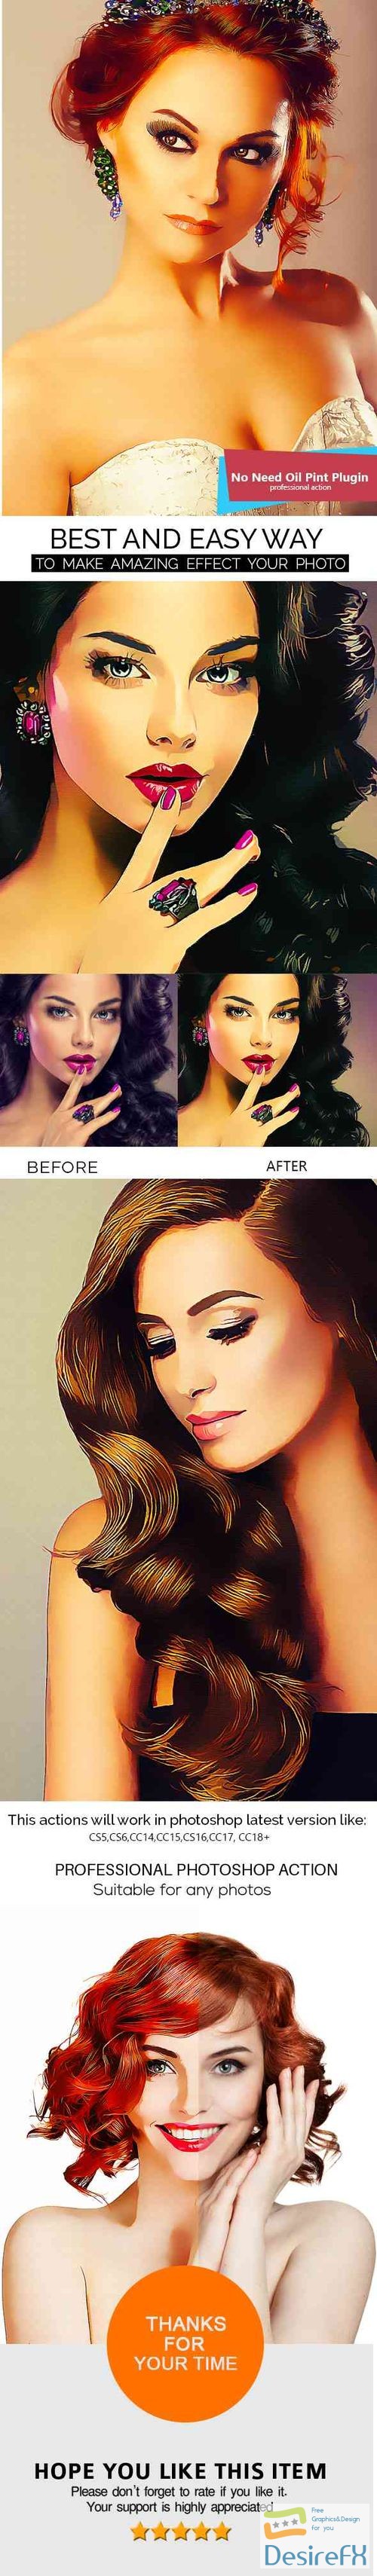 Smart Painting Photoshop Action 21507784